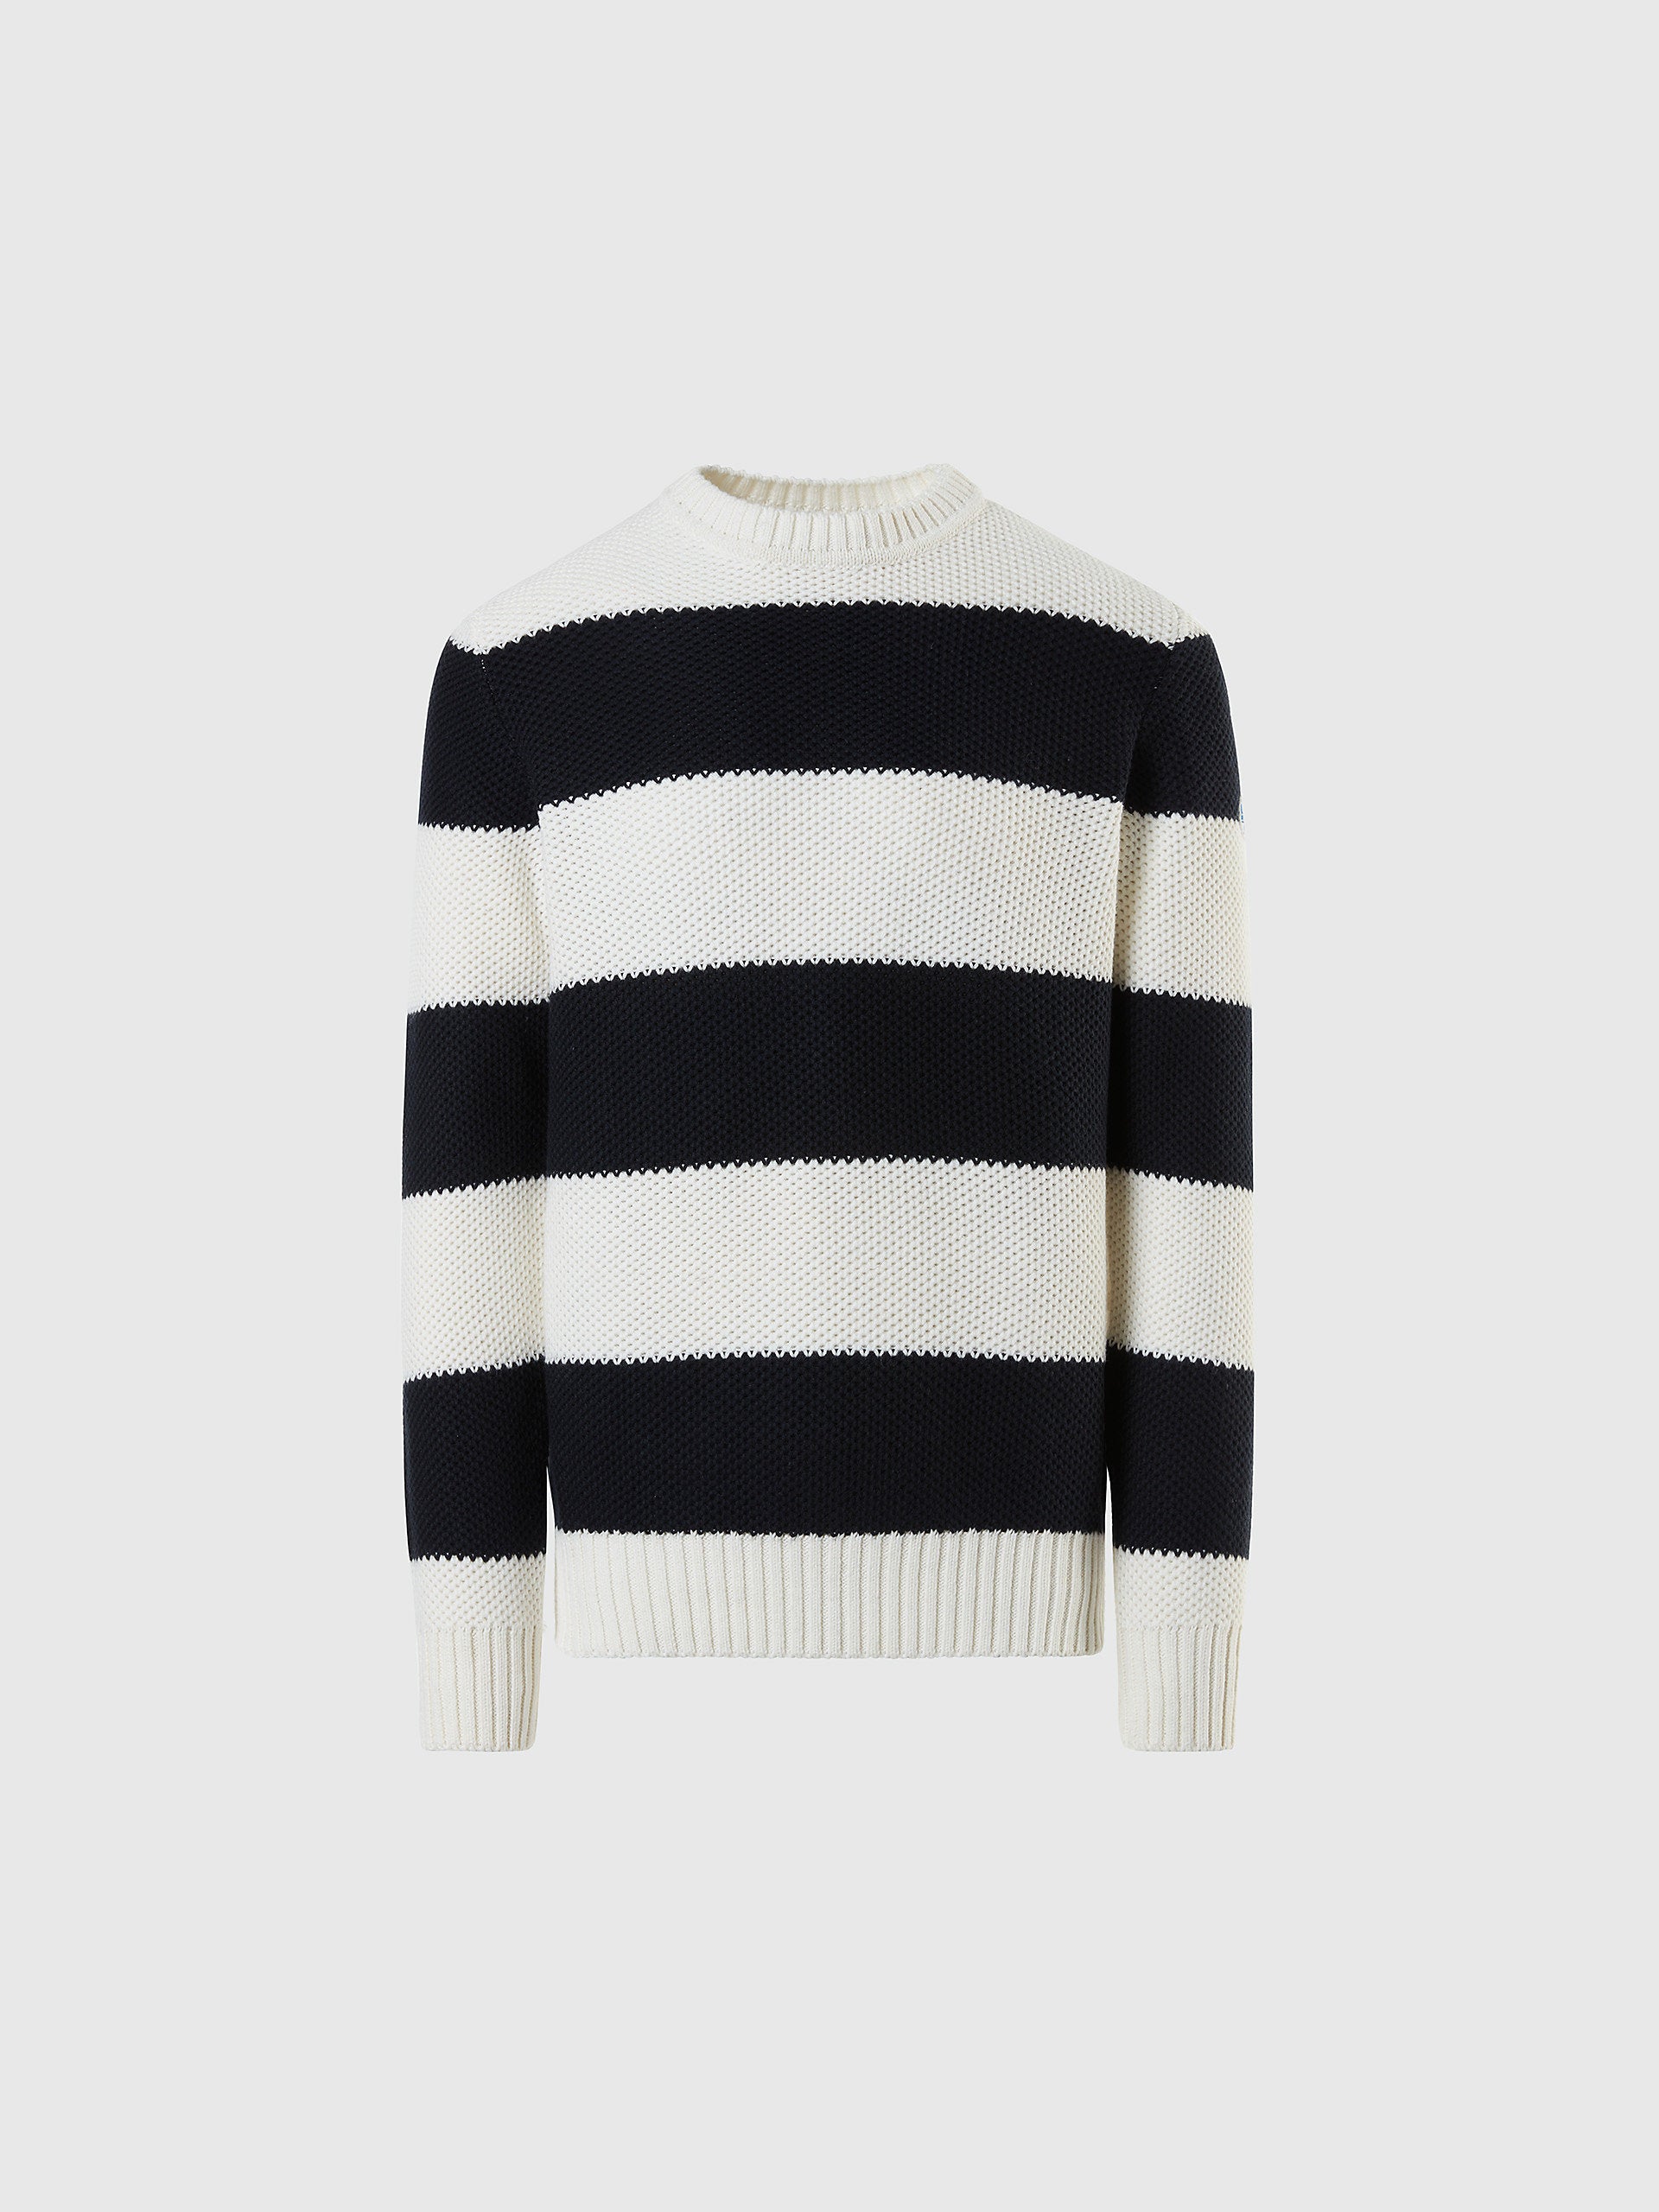 Fashion V-Neck Striped Knitting Sweater Women's Autumn Casual Loose Jumpers  Women's Pullover Sweater Tops